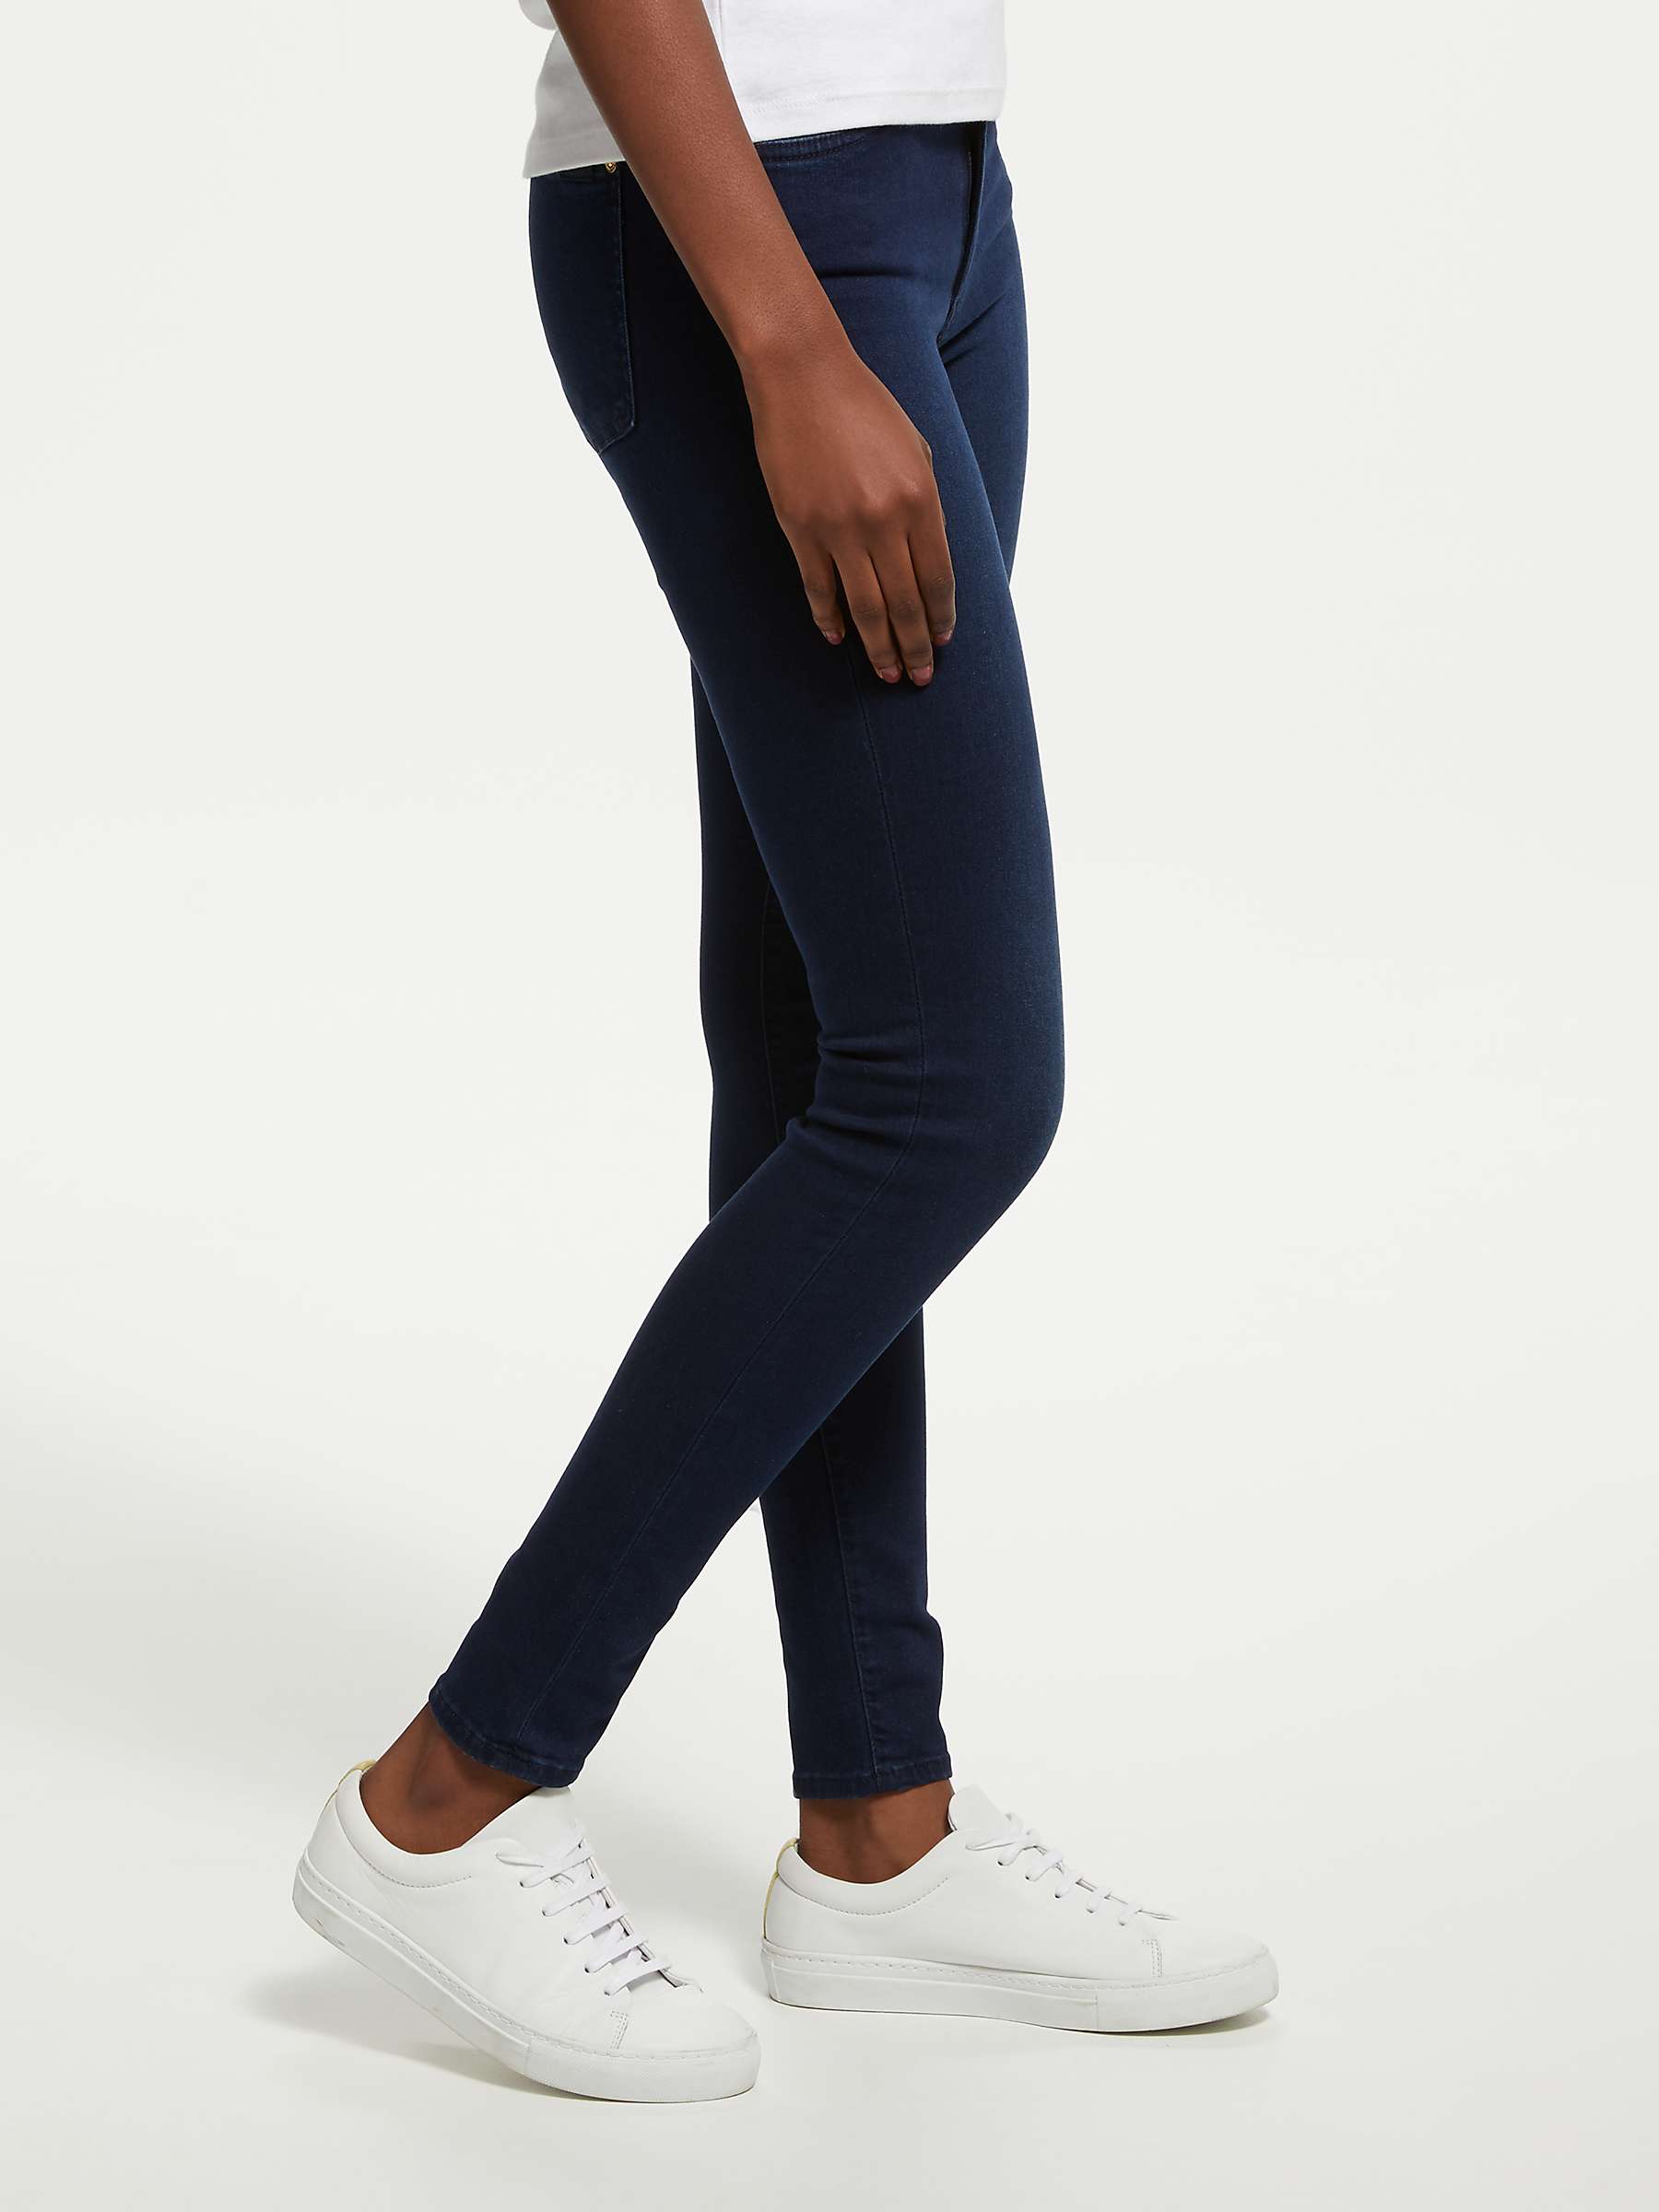 Buy 7 For All Mankind Slim Illusion Luxe Jeans, Rich Indigo Online at johnlewis.com